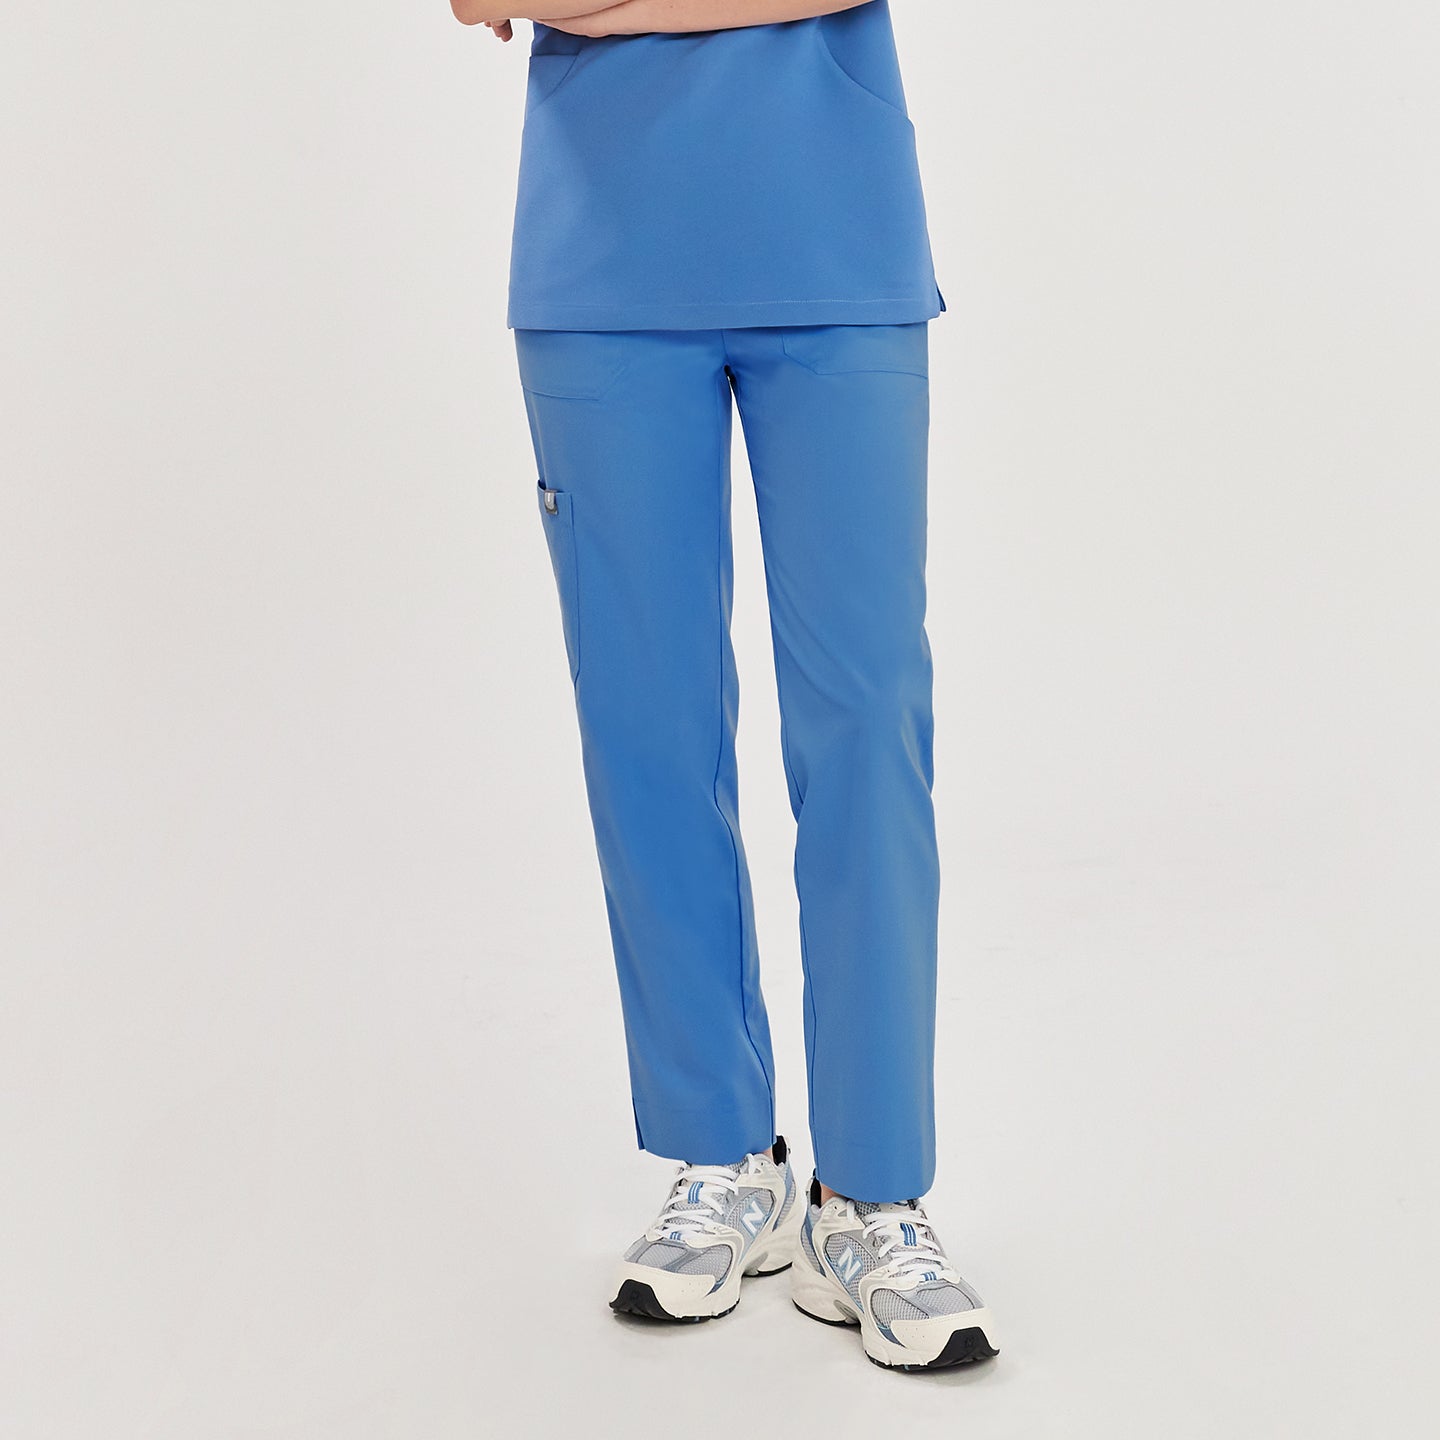 Woman in sky blue zipper slit scrub pants with a side pocket and matching top, showing the pants from the front,Sky Blue